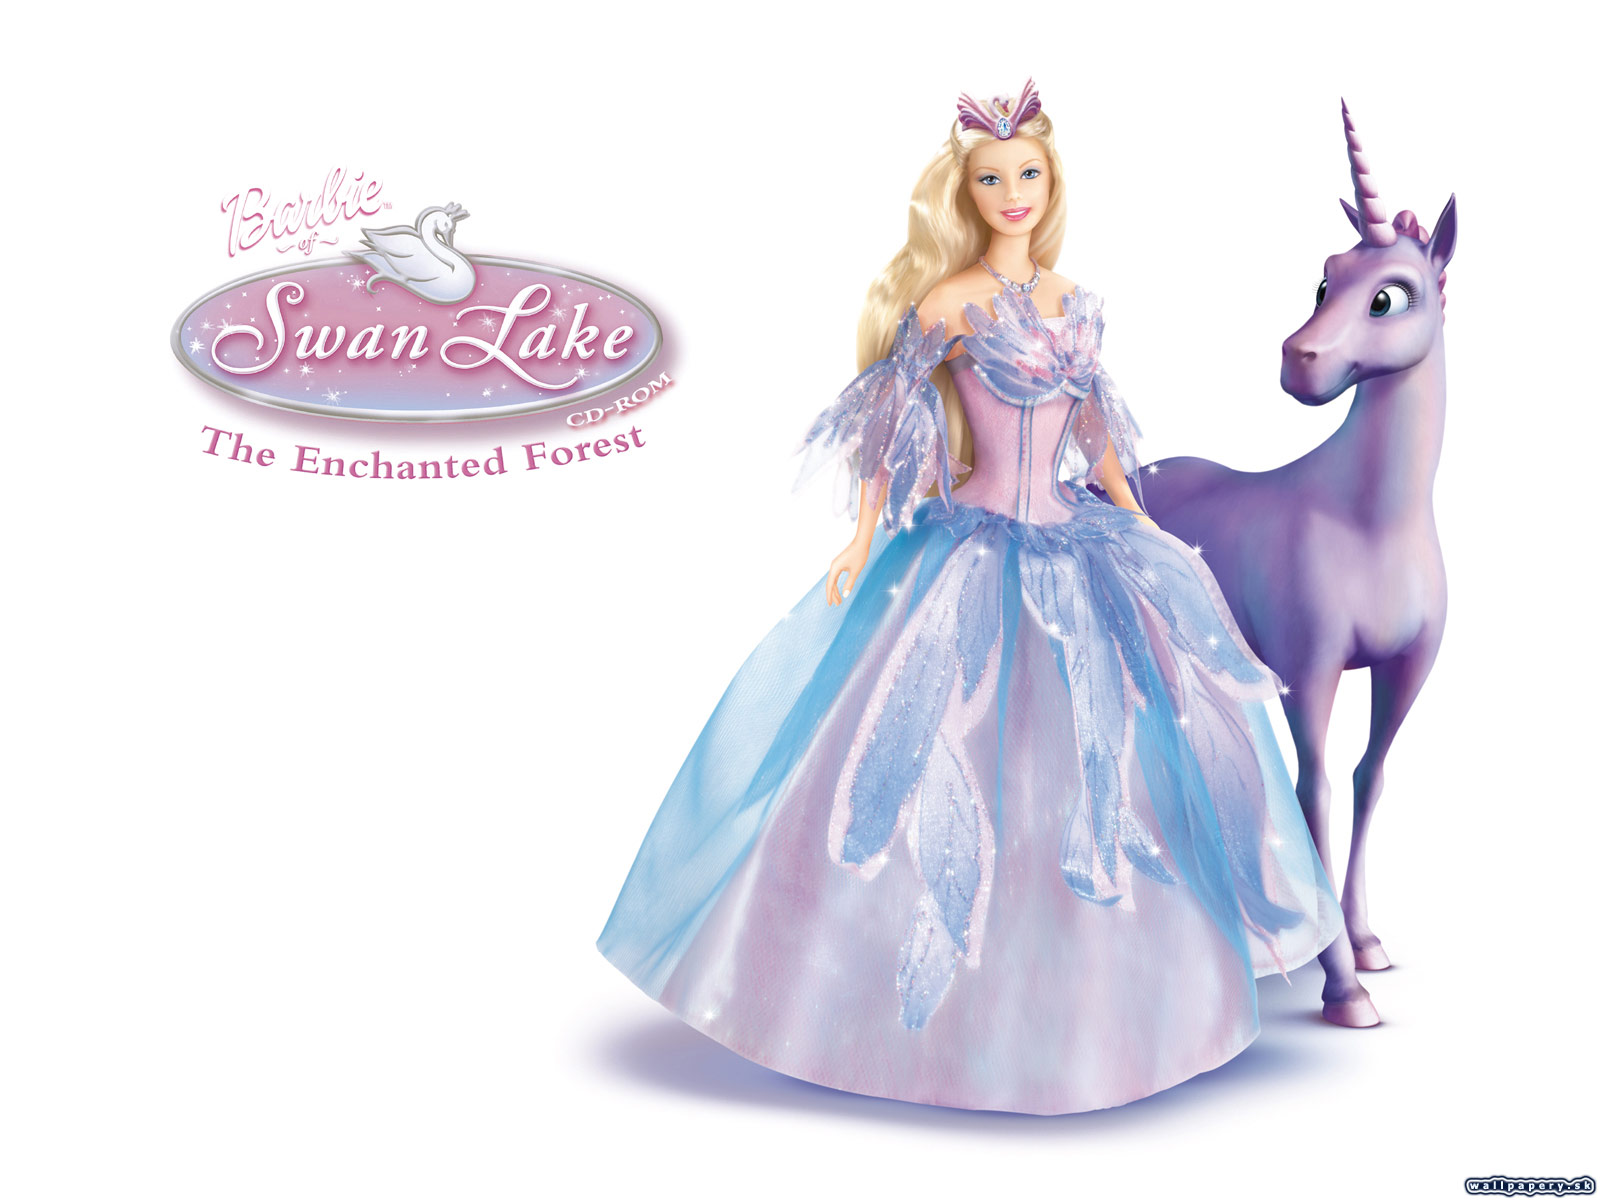 Barbie of Swan Lake: The Enchanted Forest - wallpaper 2